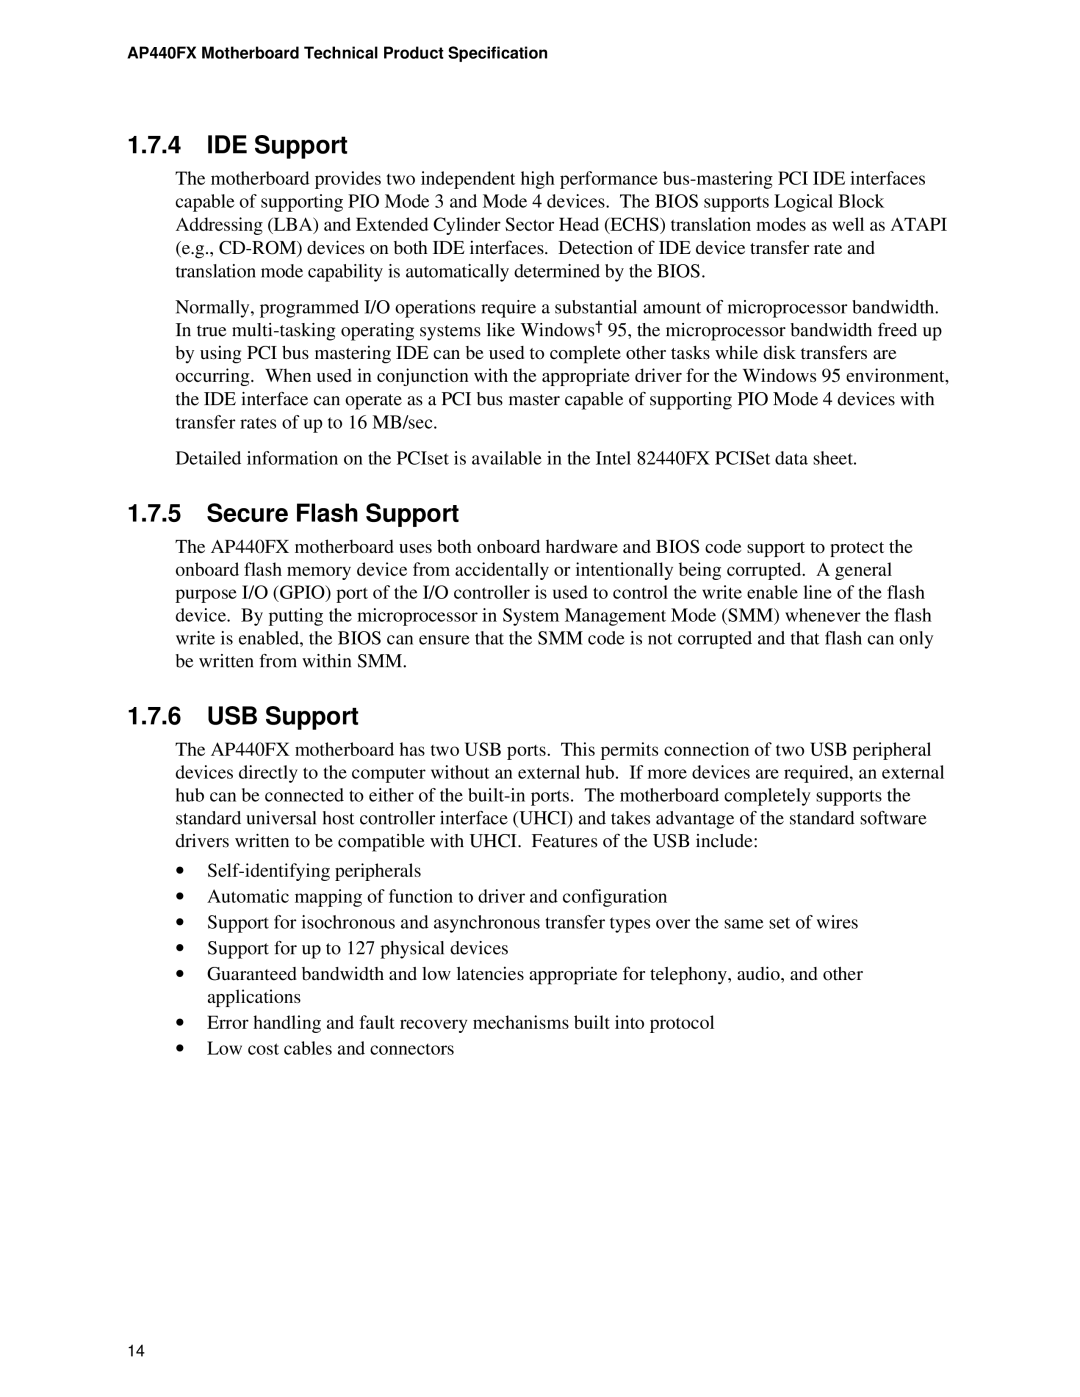 Intel AP440FX specifications IDE Support, Secure Flash Support, USB Support 